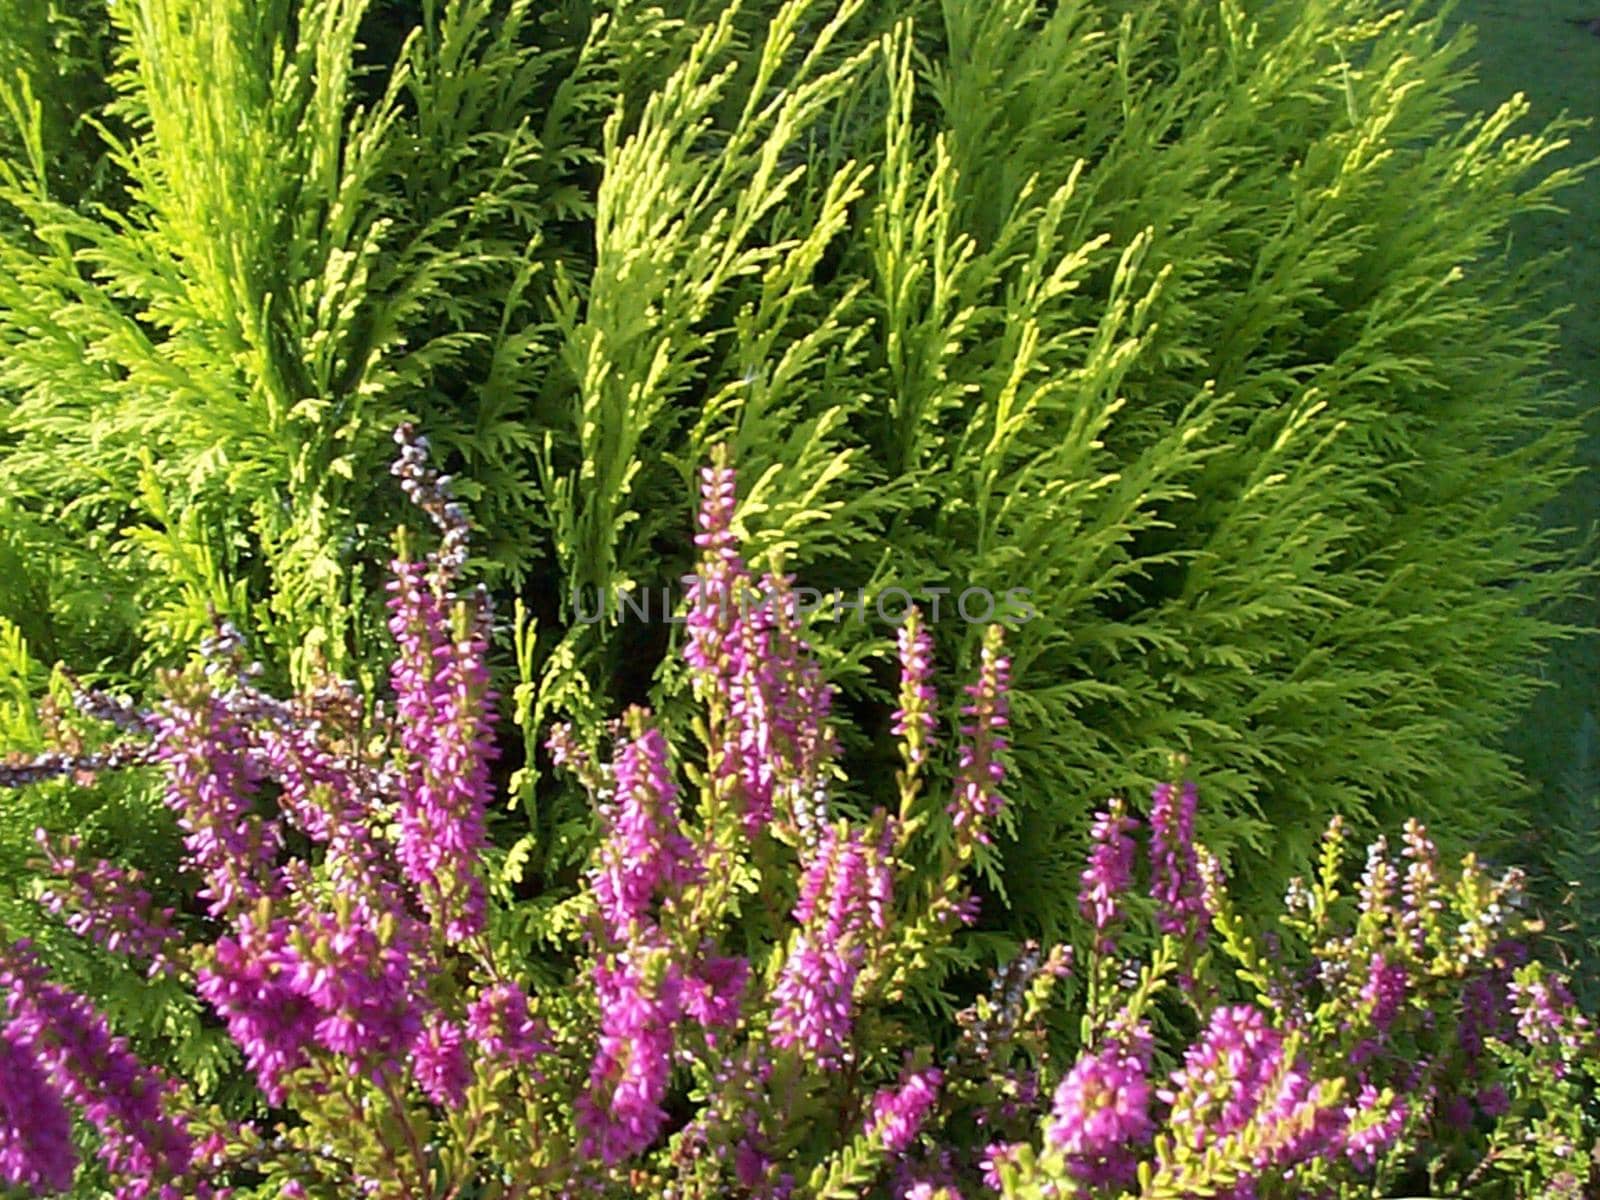 Pretty purple heather growing at the foot of an evergreen cyprus or fir tree in a nature background image